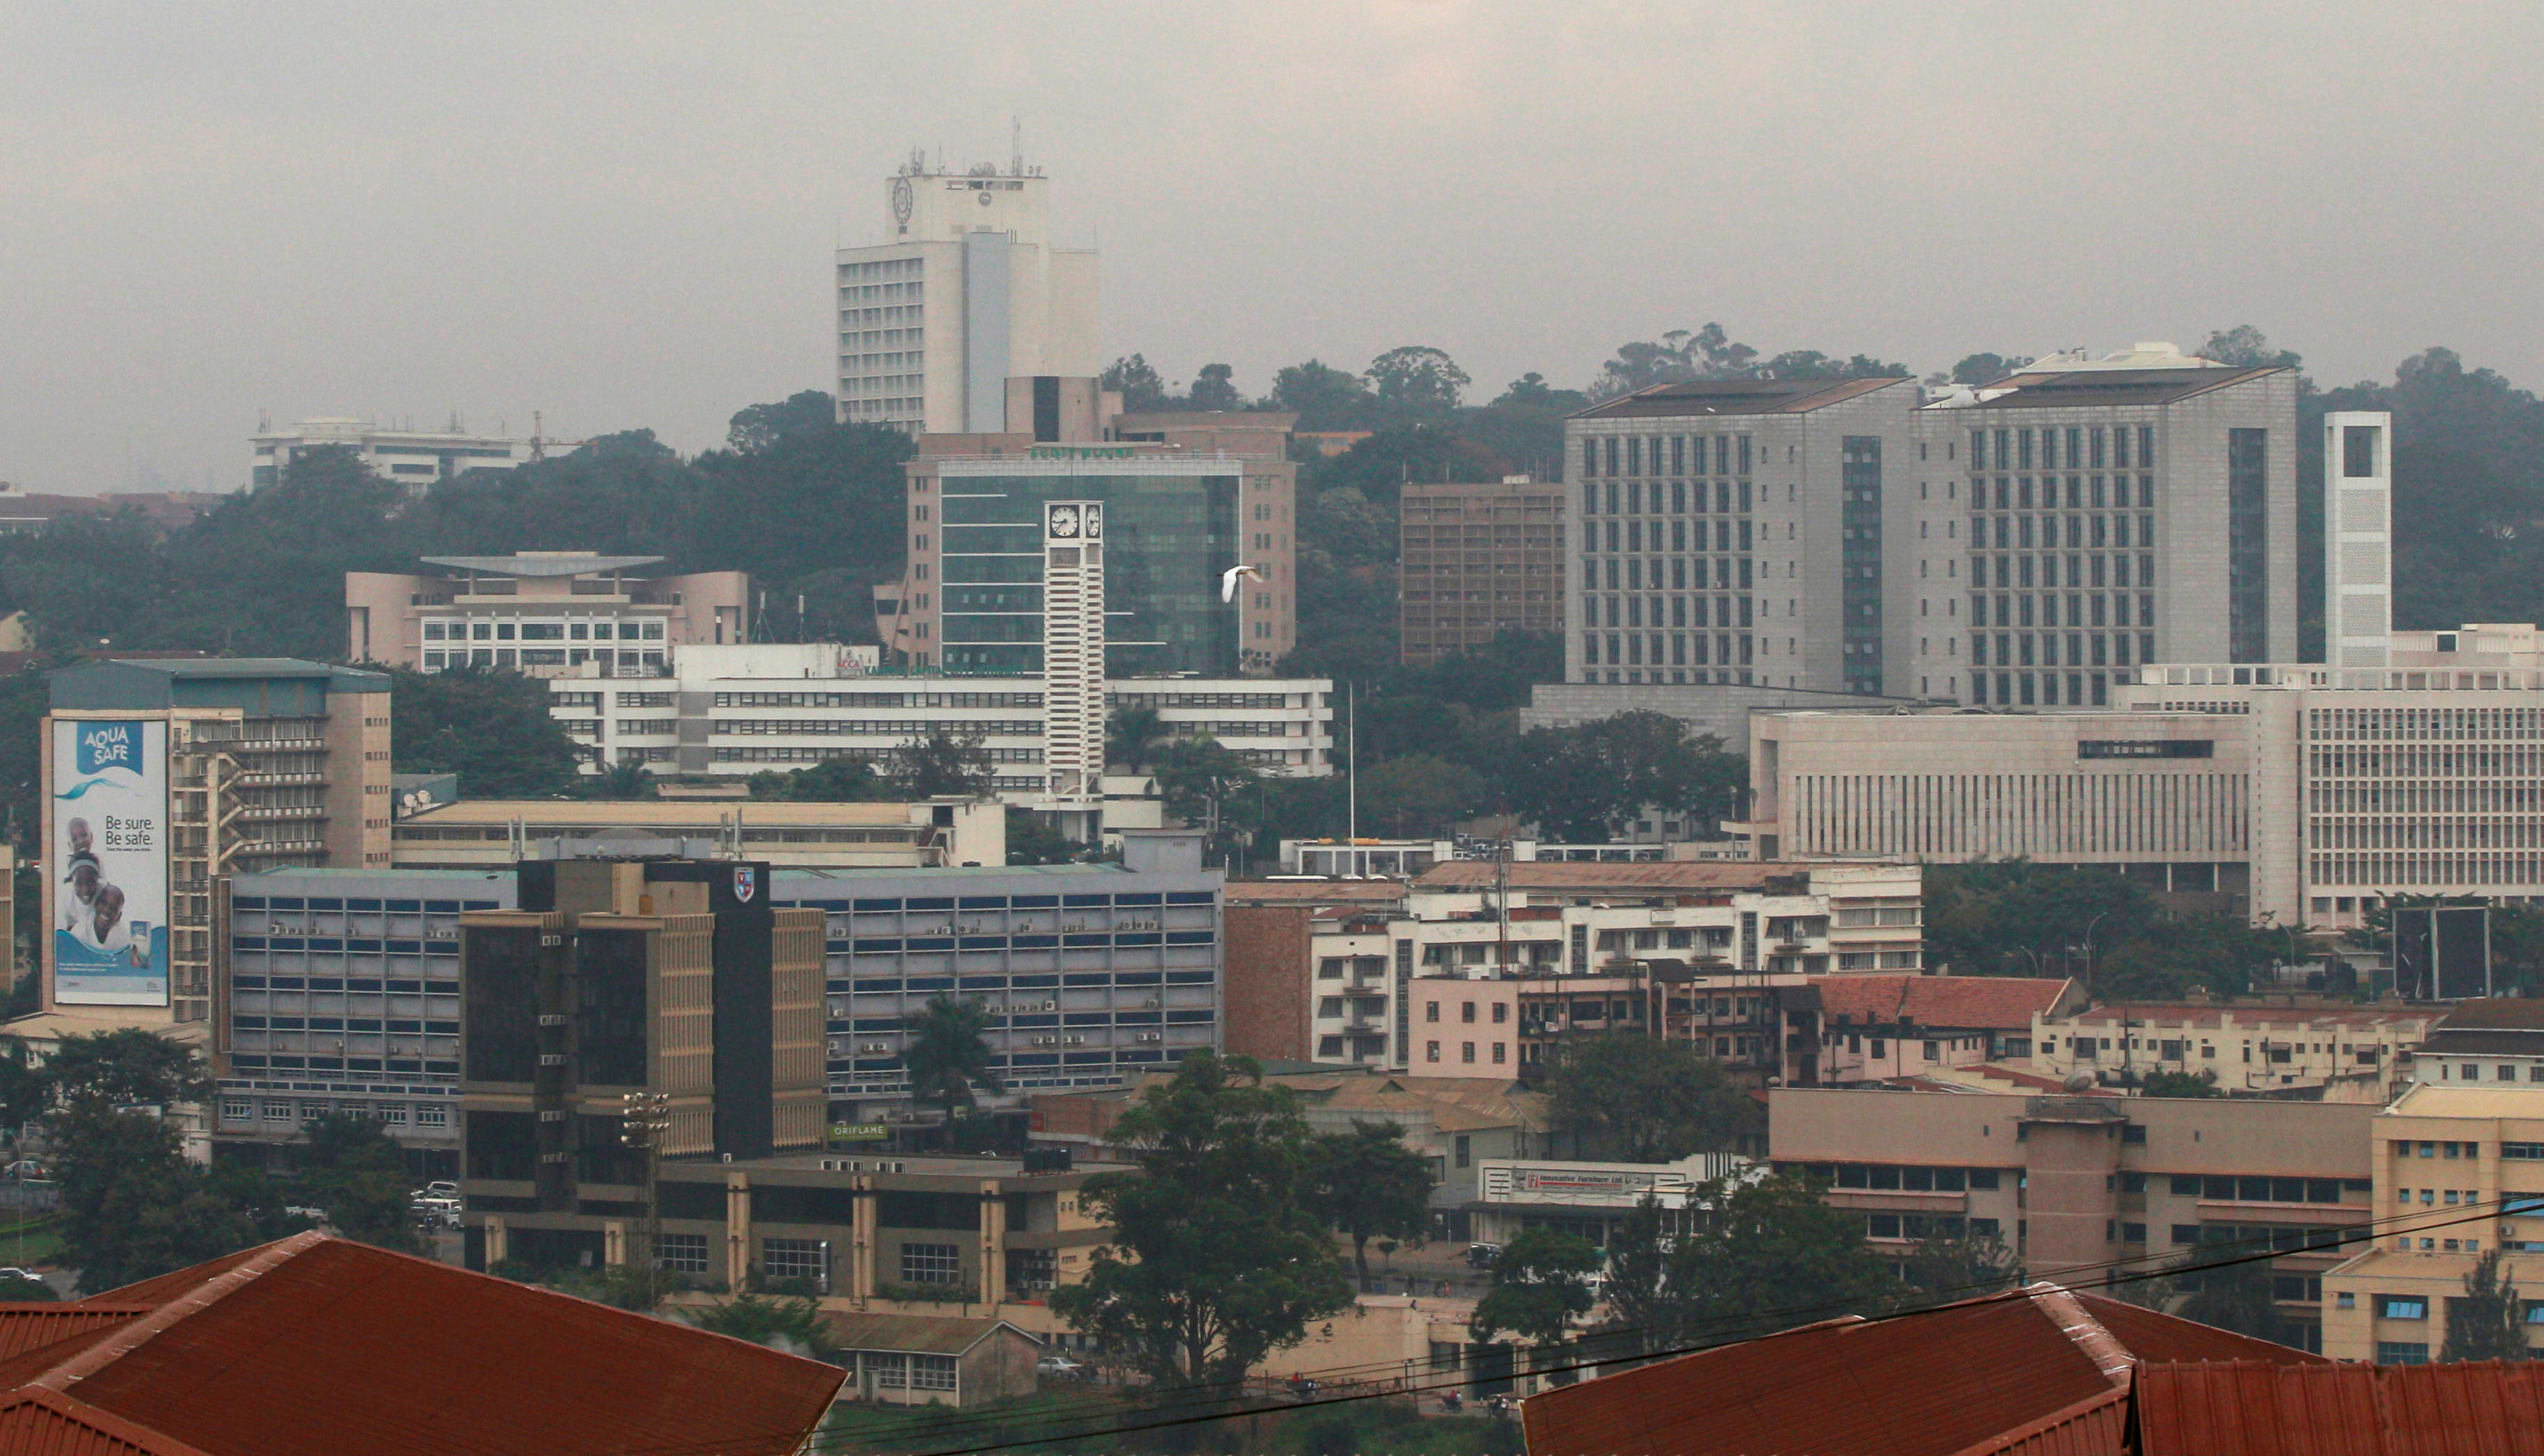 A general view shows the capital city of Kampala in Uganda